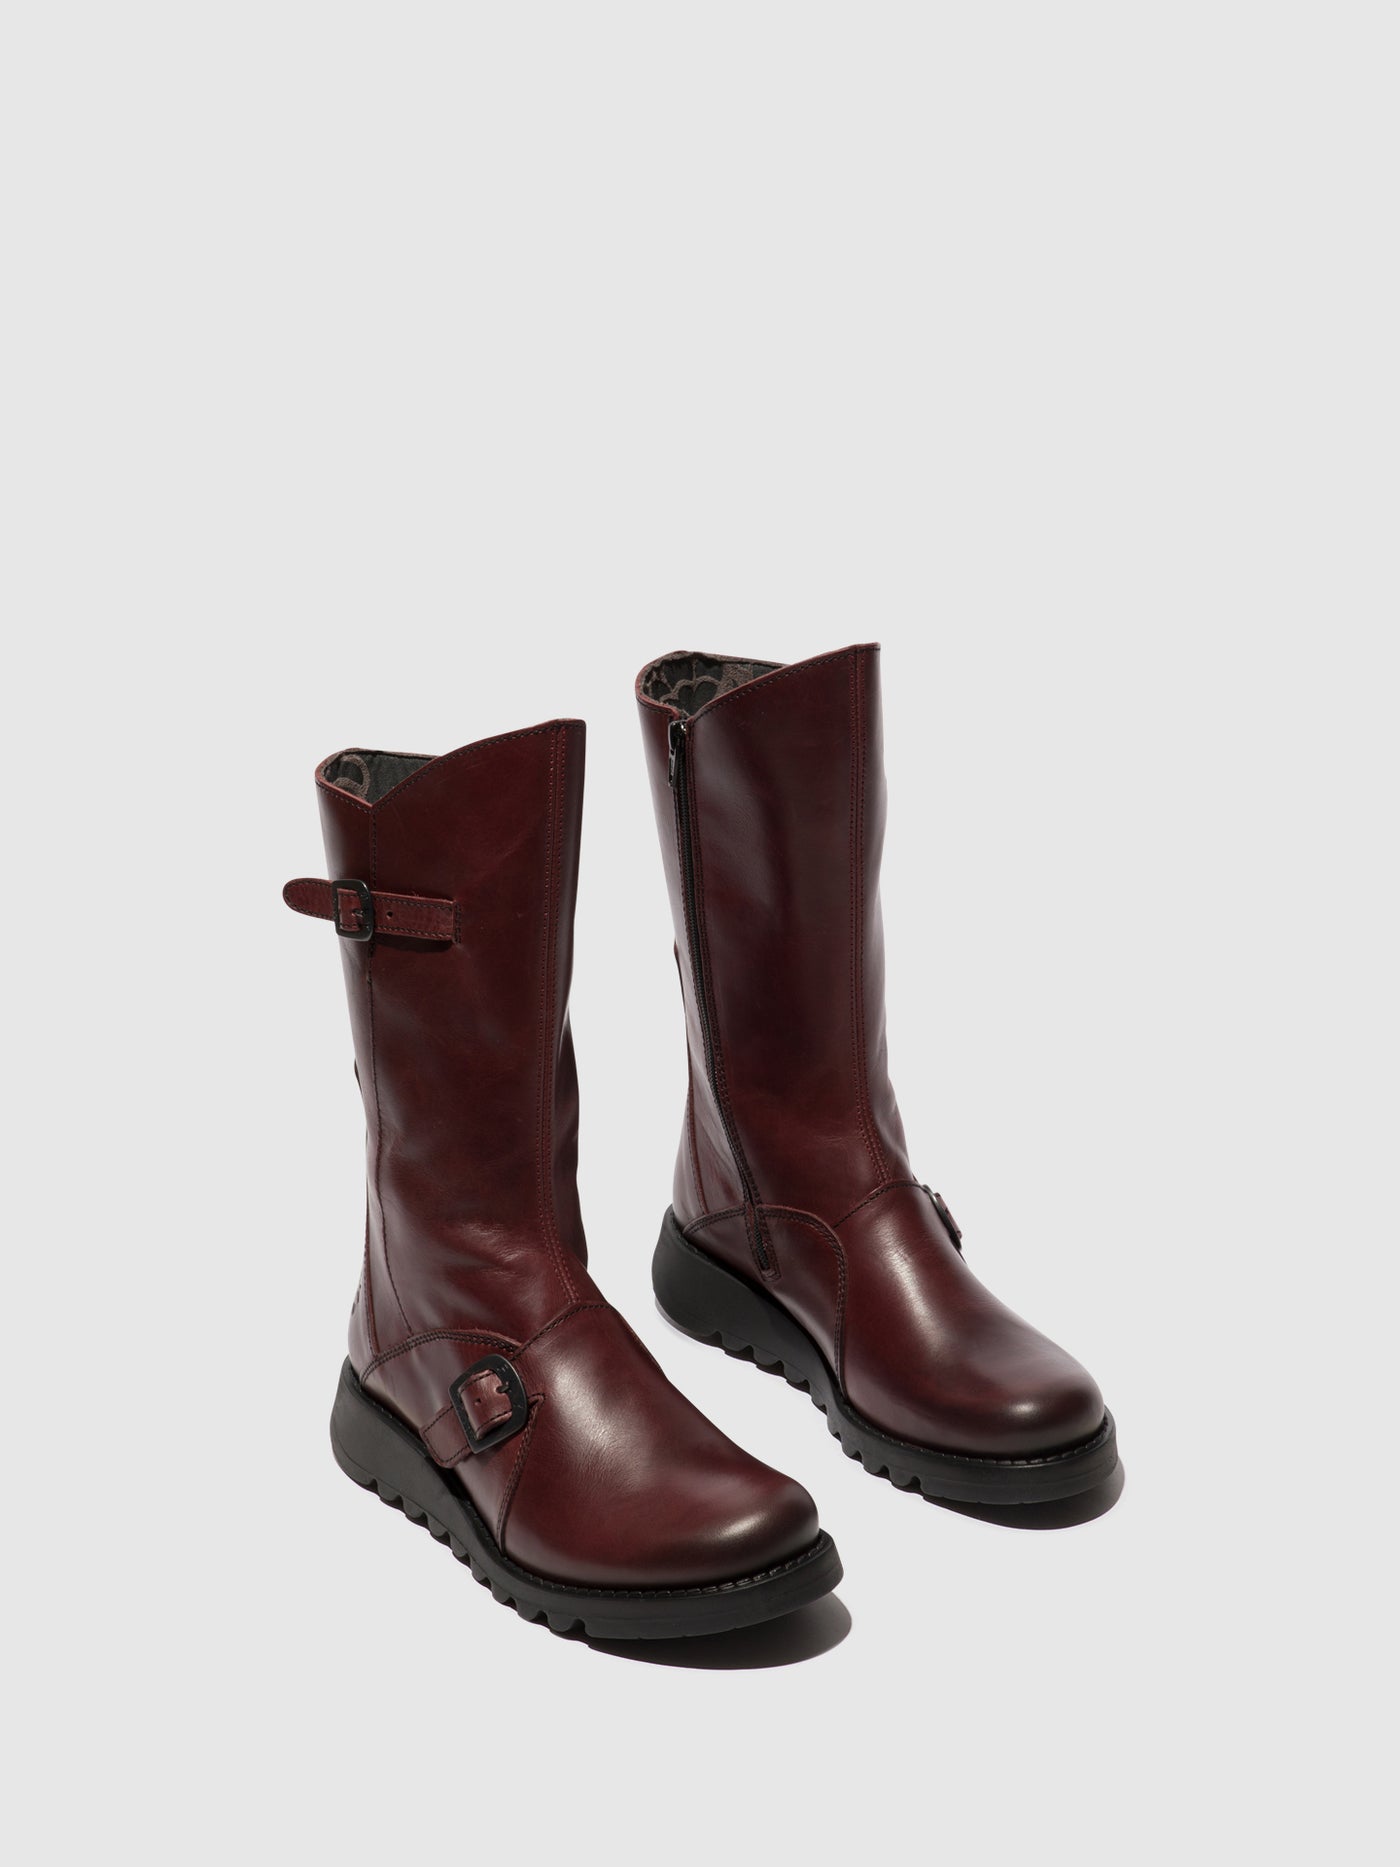 Buckle Boots MES 2 WINE(BLACK SOLE)